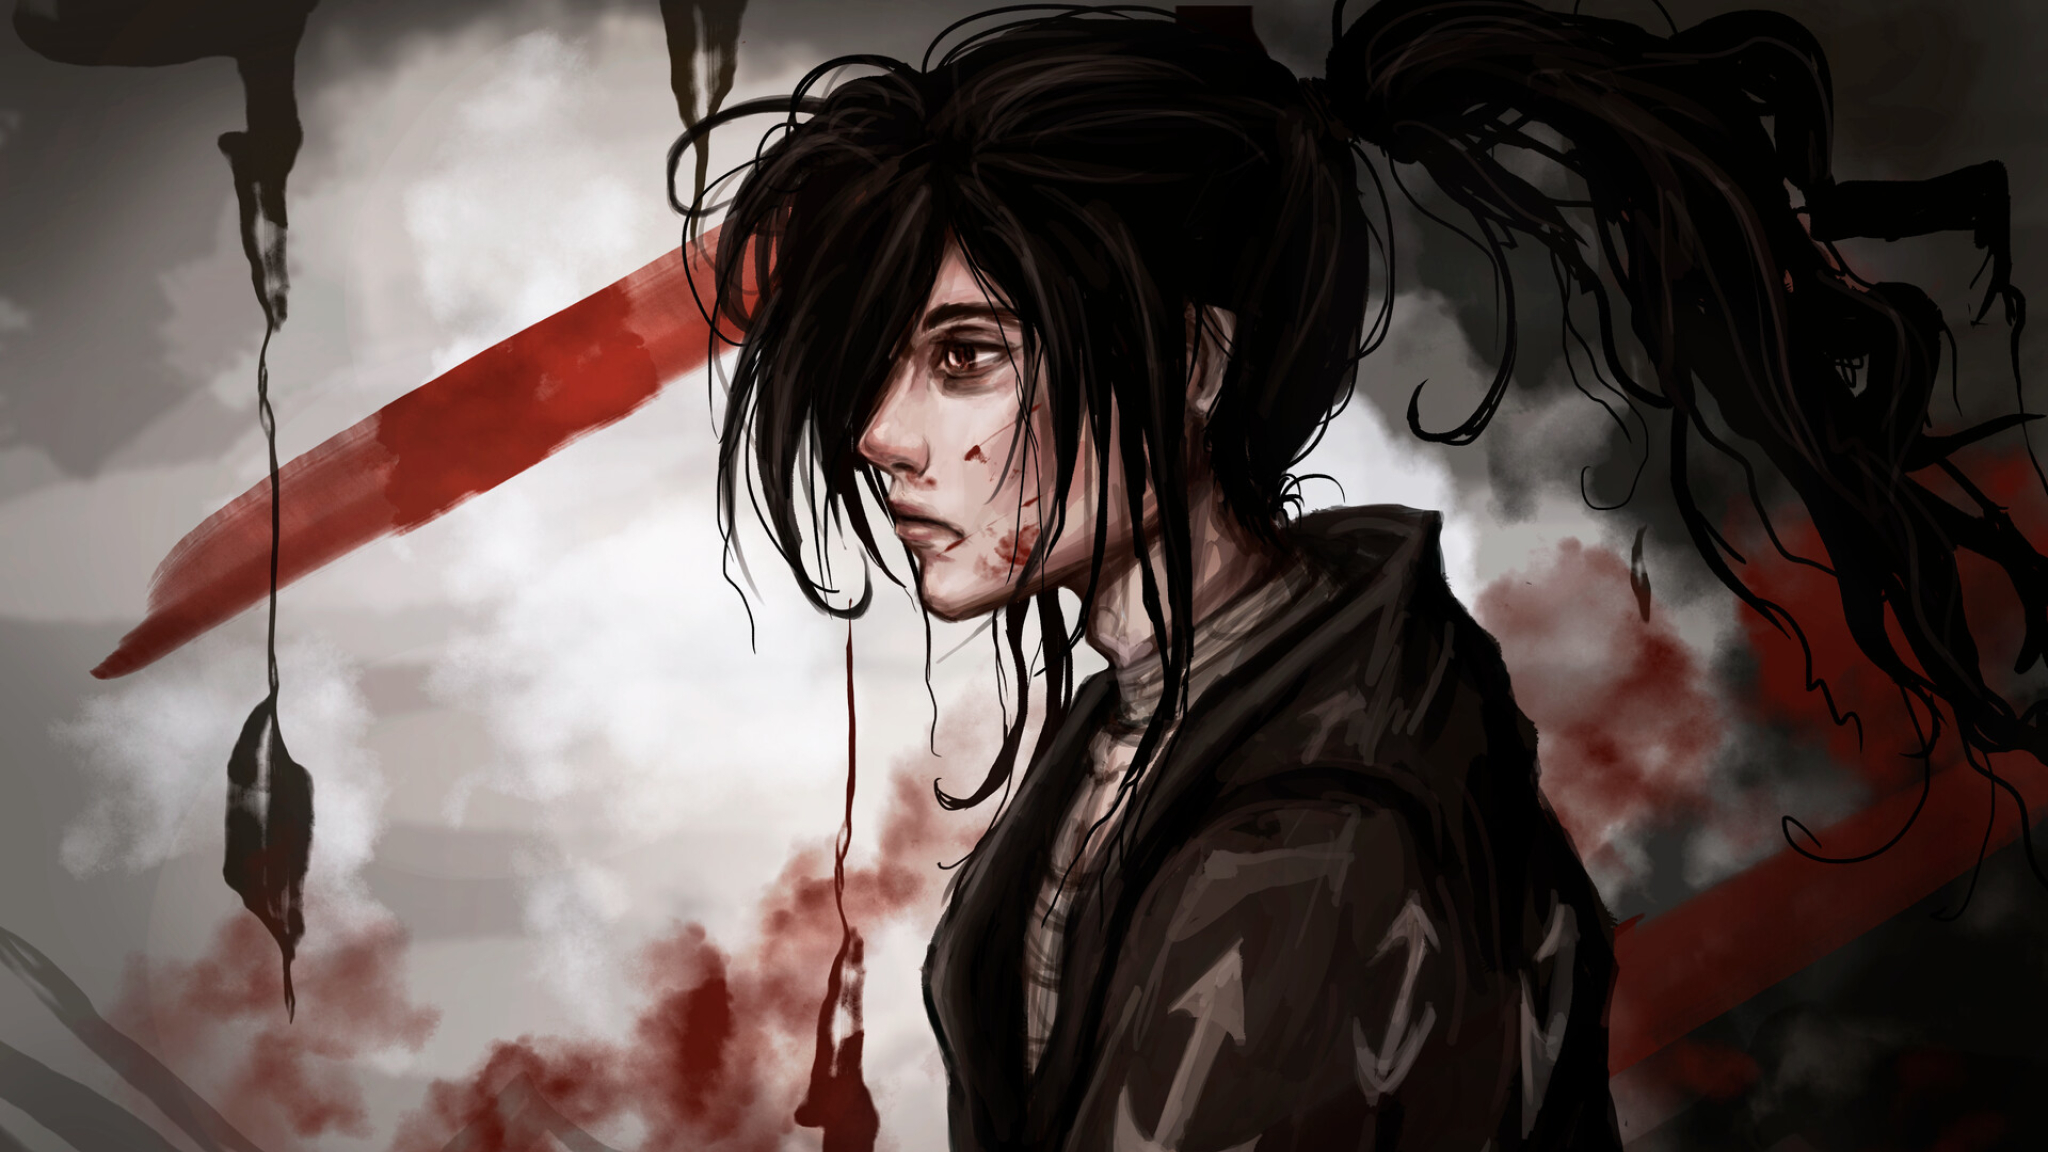 2048x1152 Hyakkimaru In Dororo Anime 2048x1152 Resolution Wallpaper Hd Anime 4k Wallpapers Images Photos And Background